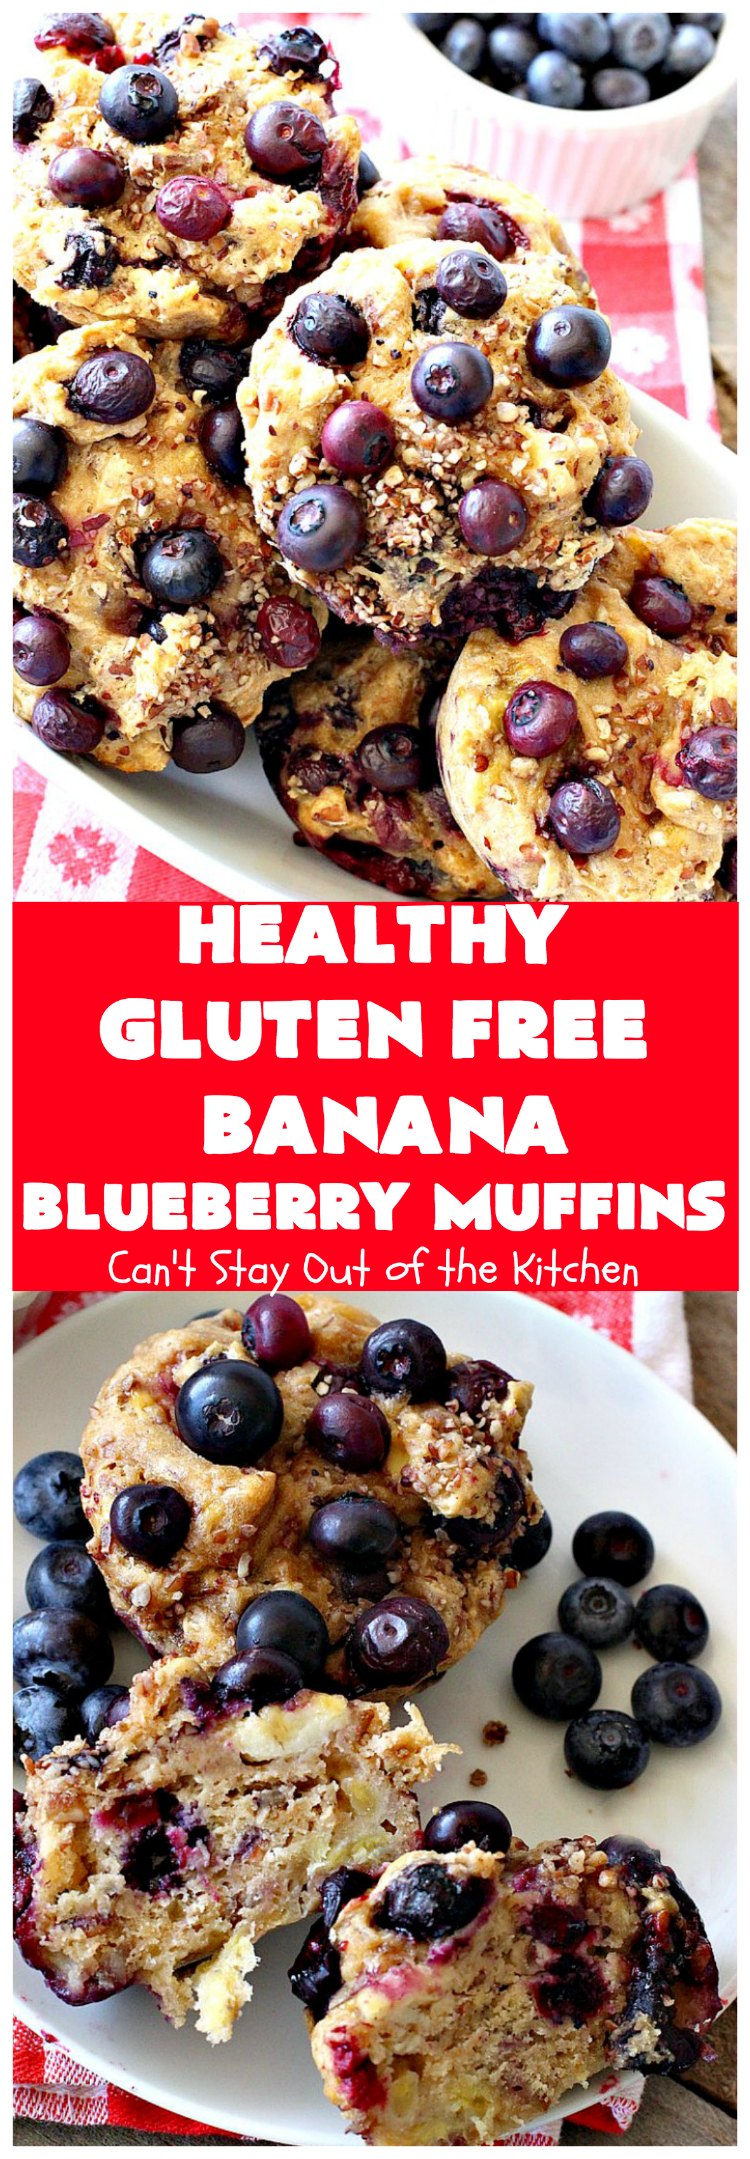 Healthy Gluten Free Banana Blueberry Muffins | Can't Stay Out of the Kitchen